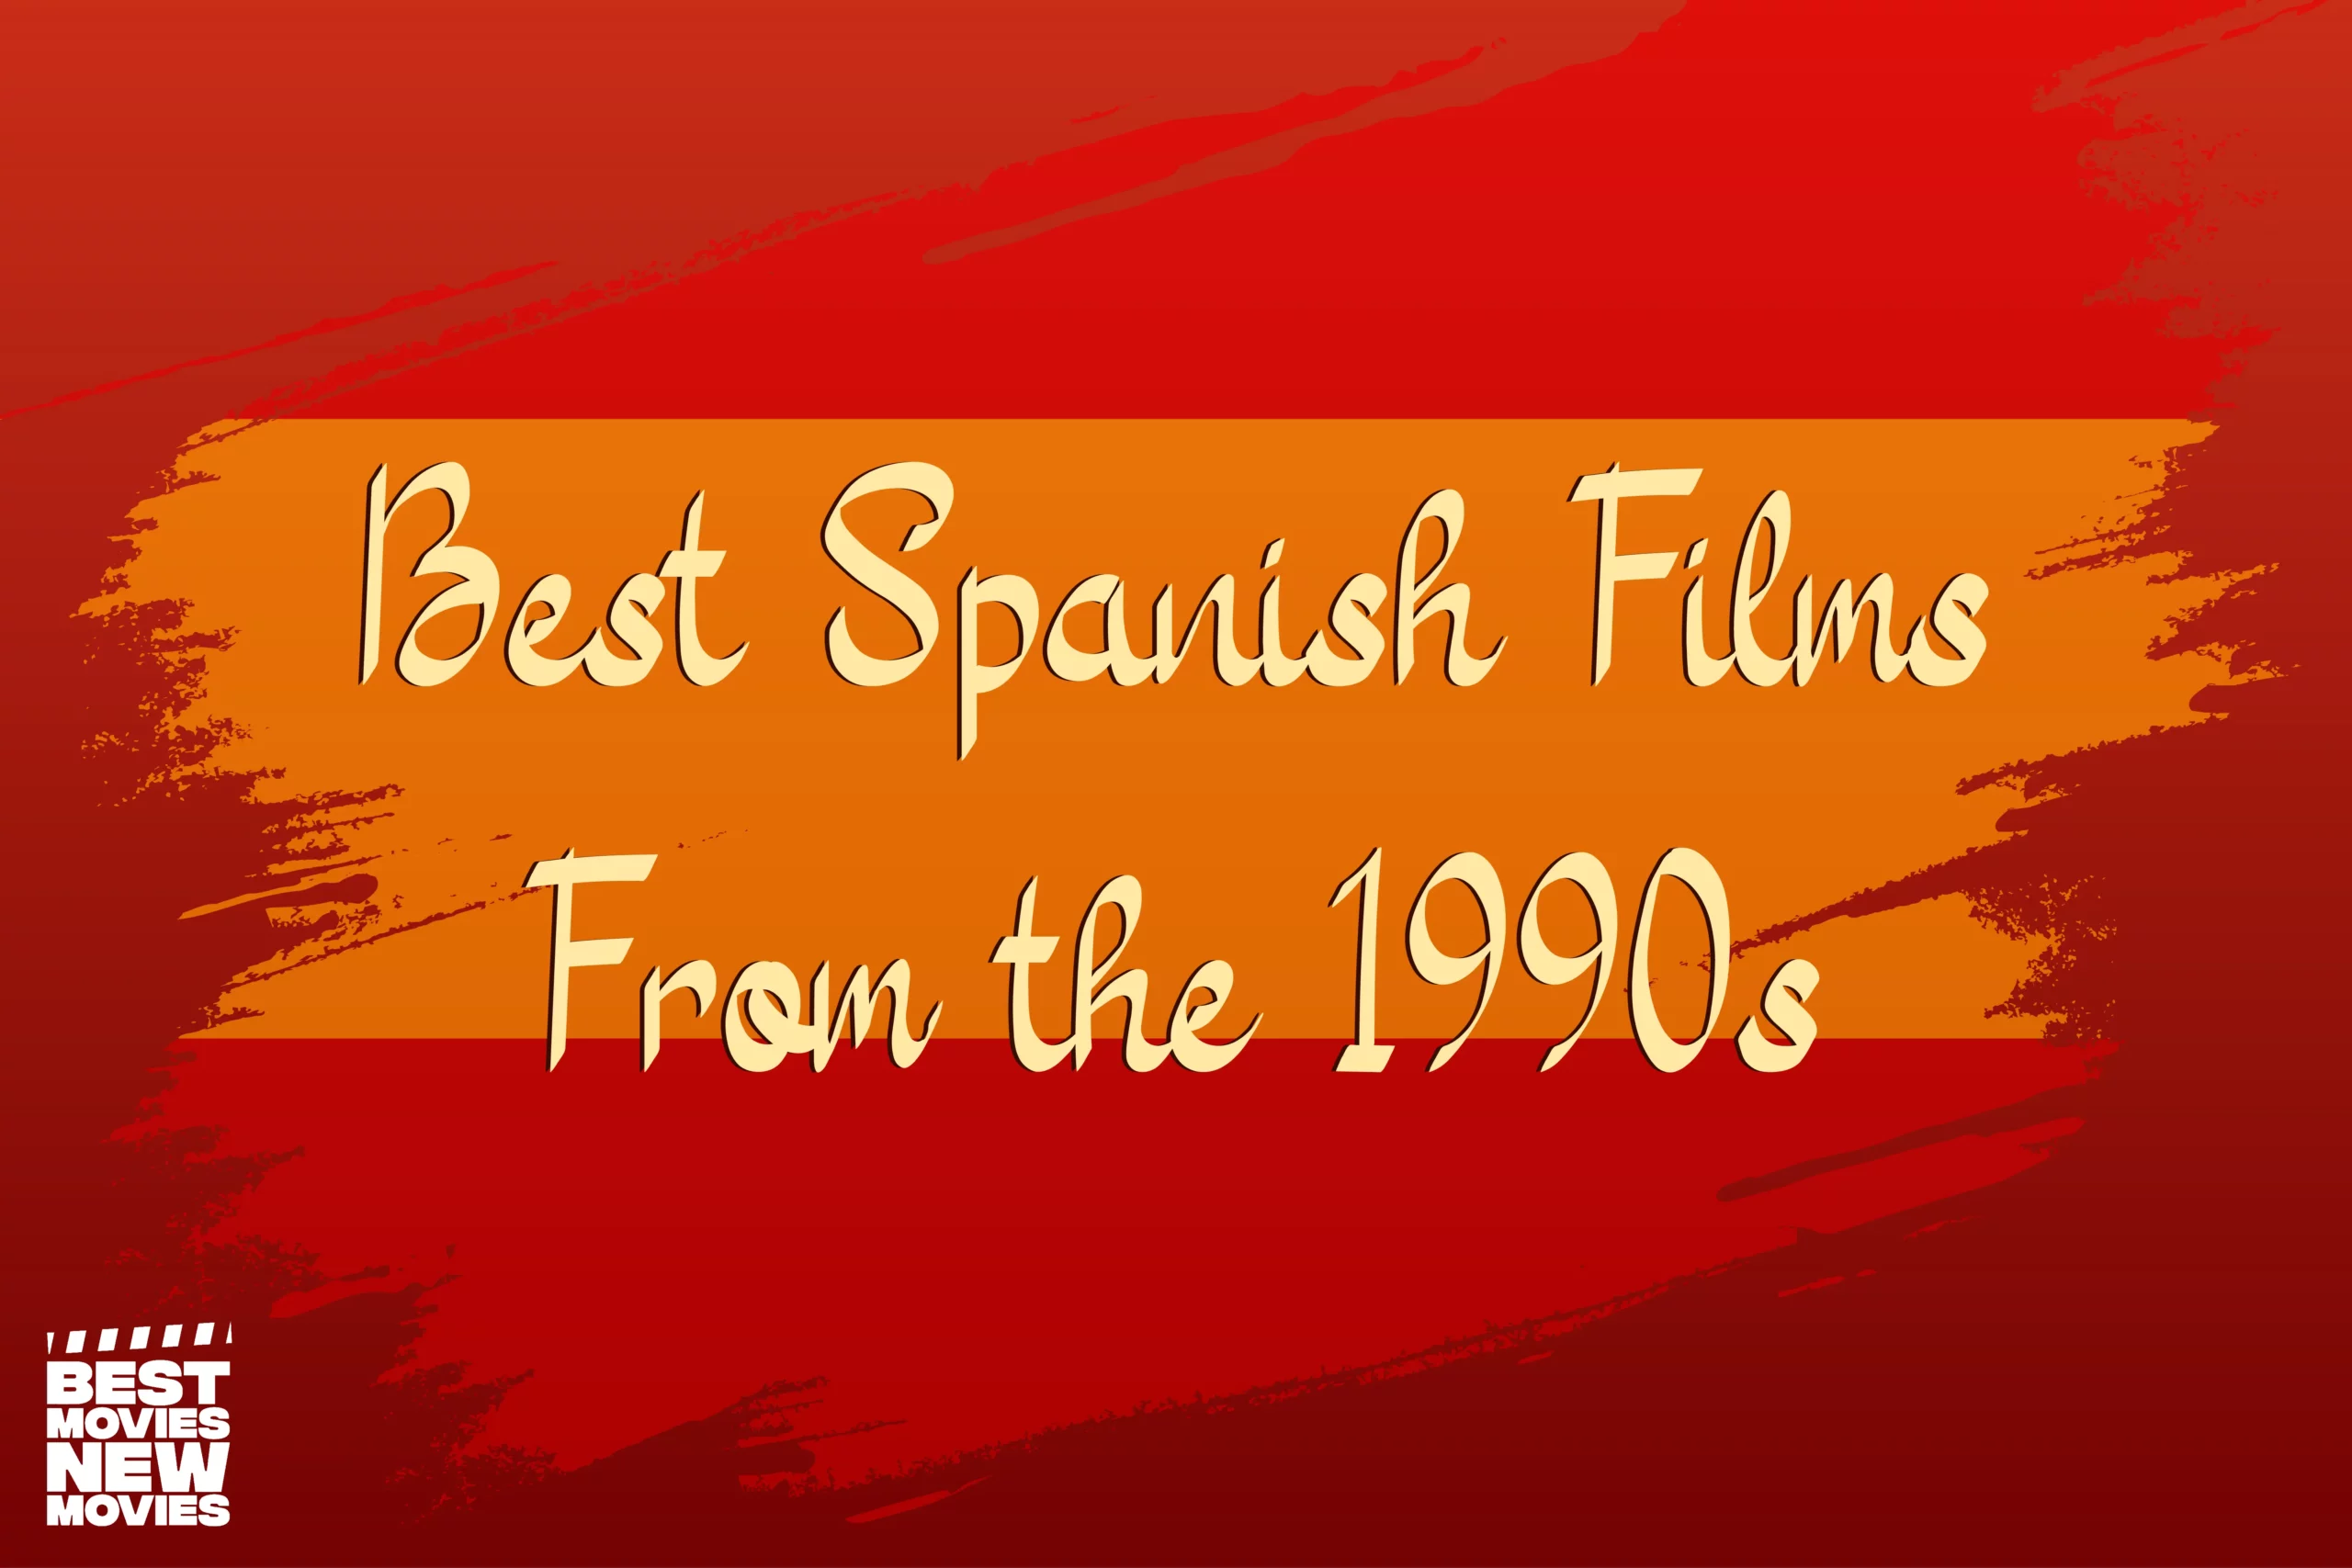 Best Spanish Films from the 1990s